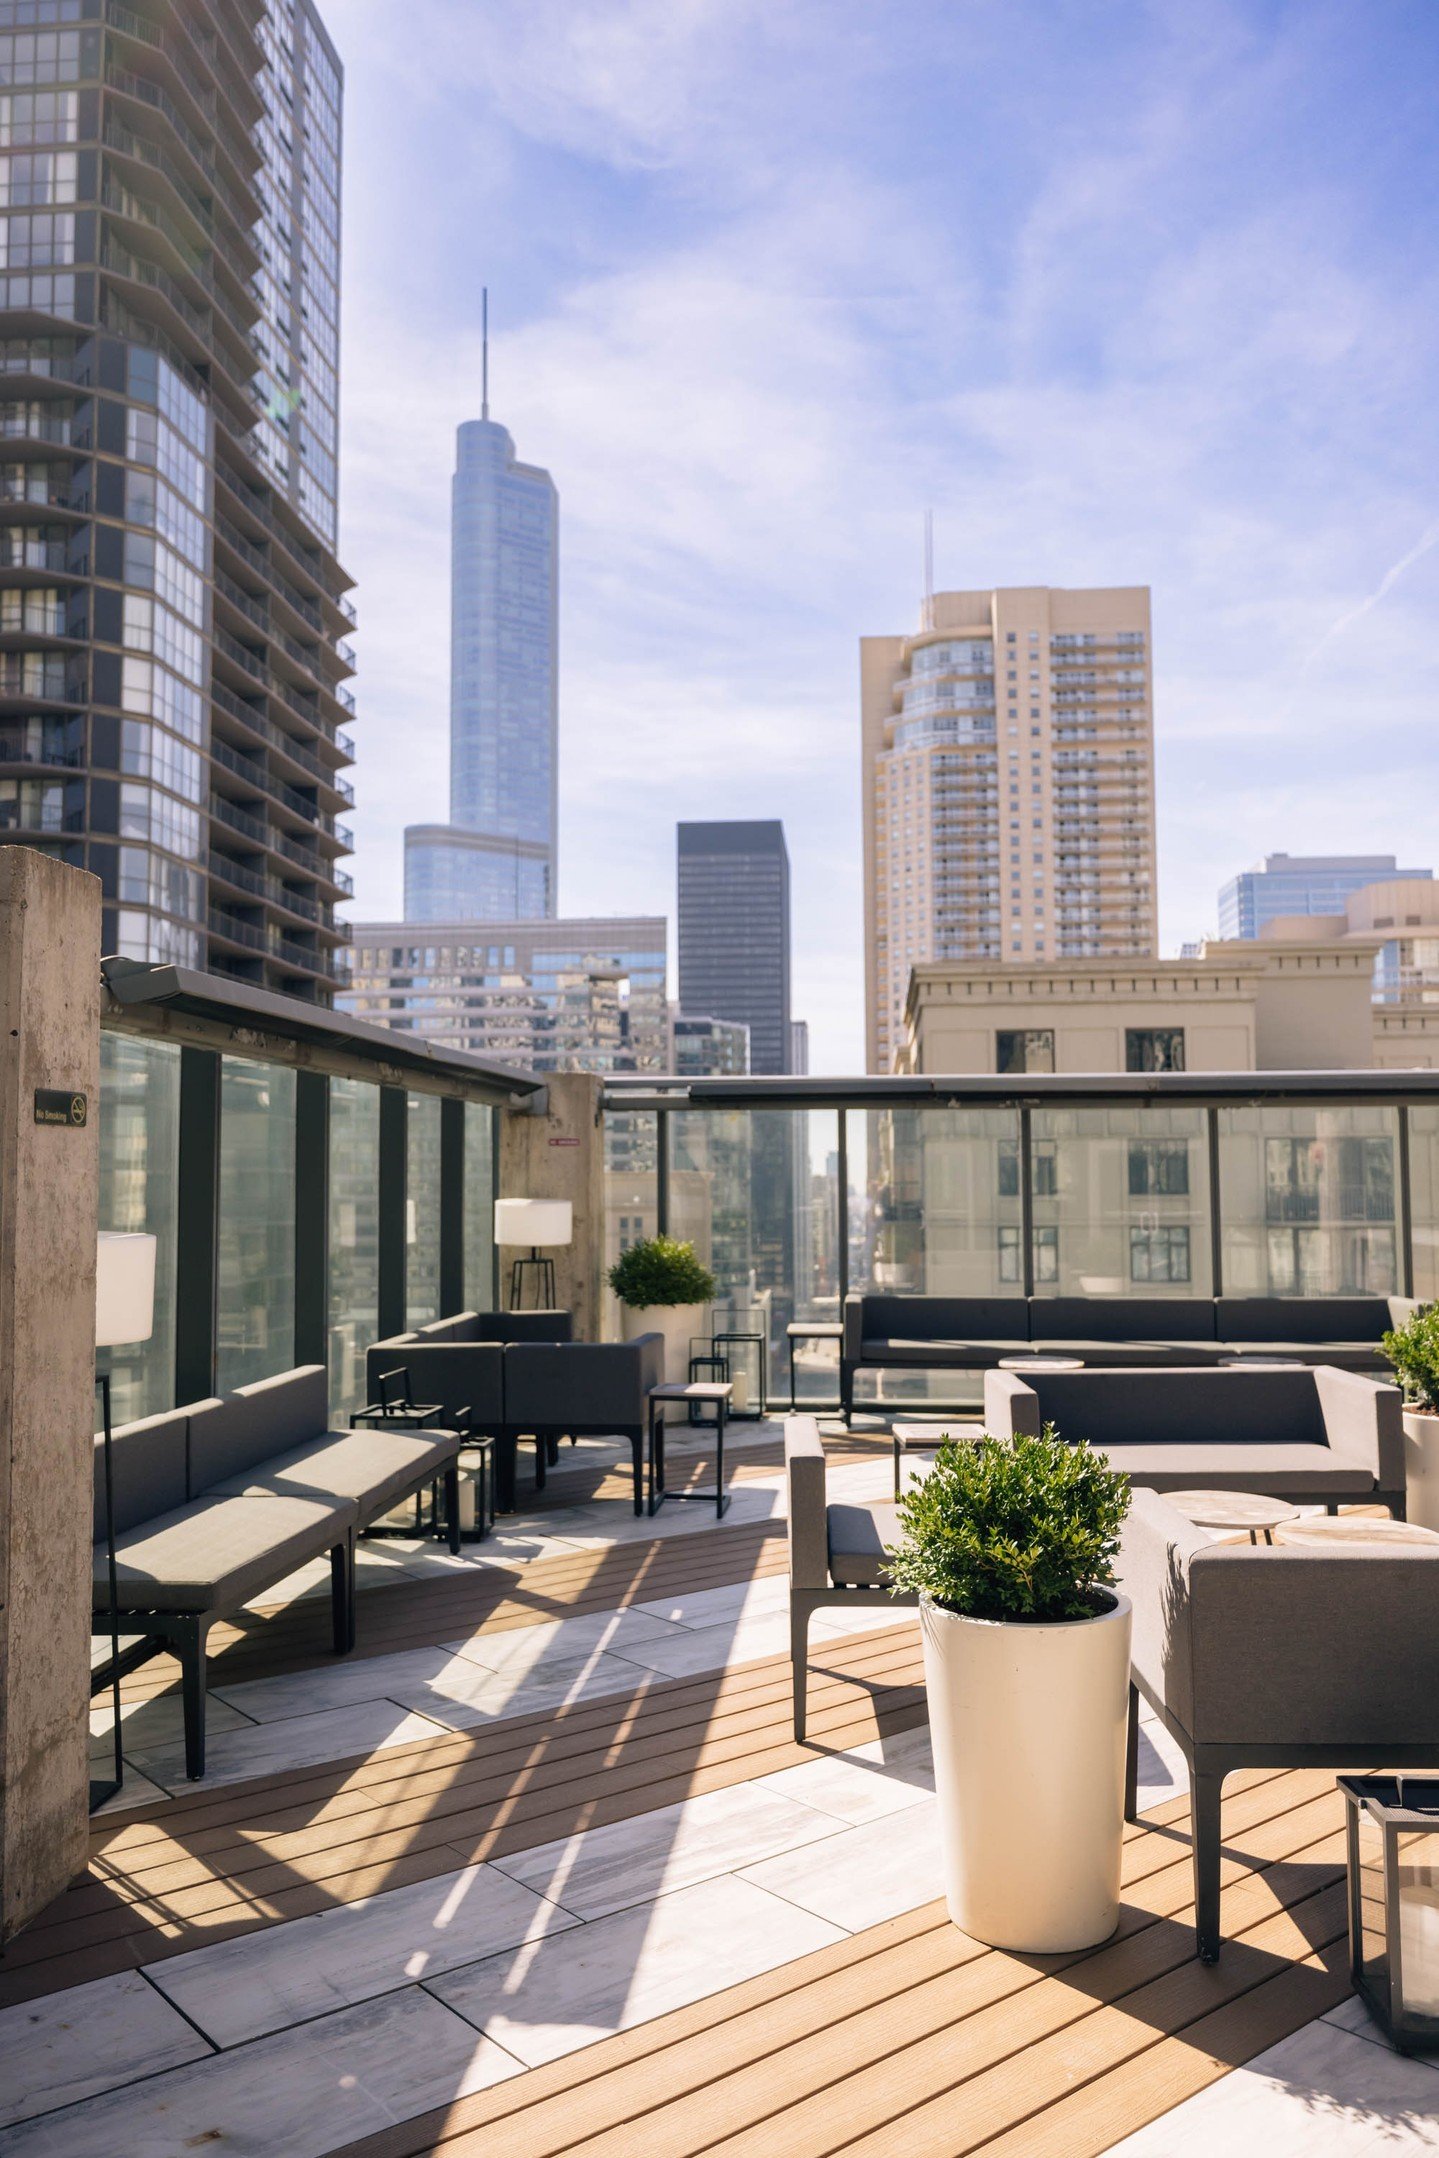 These rooftop views never cease to amaze us 🤩 Book an event at Twenty-Six for any celebration! Wow your guests with stunning rooftop views of River North as you celebrate amongst the city lights ✨🥂

📸  @eurostarsmagmile
.
.
.
#twentysixchicago #ev